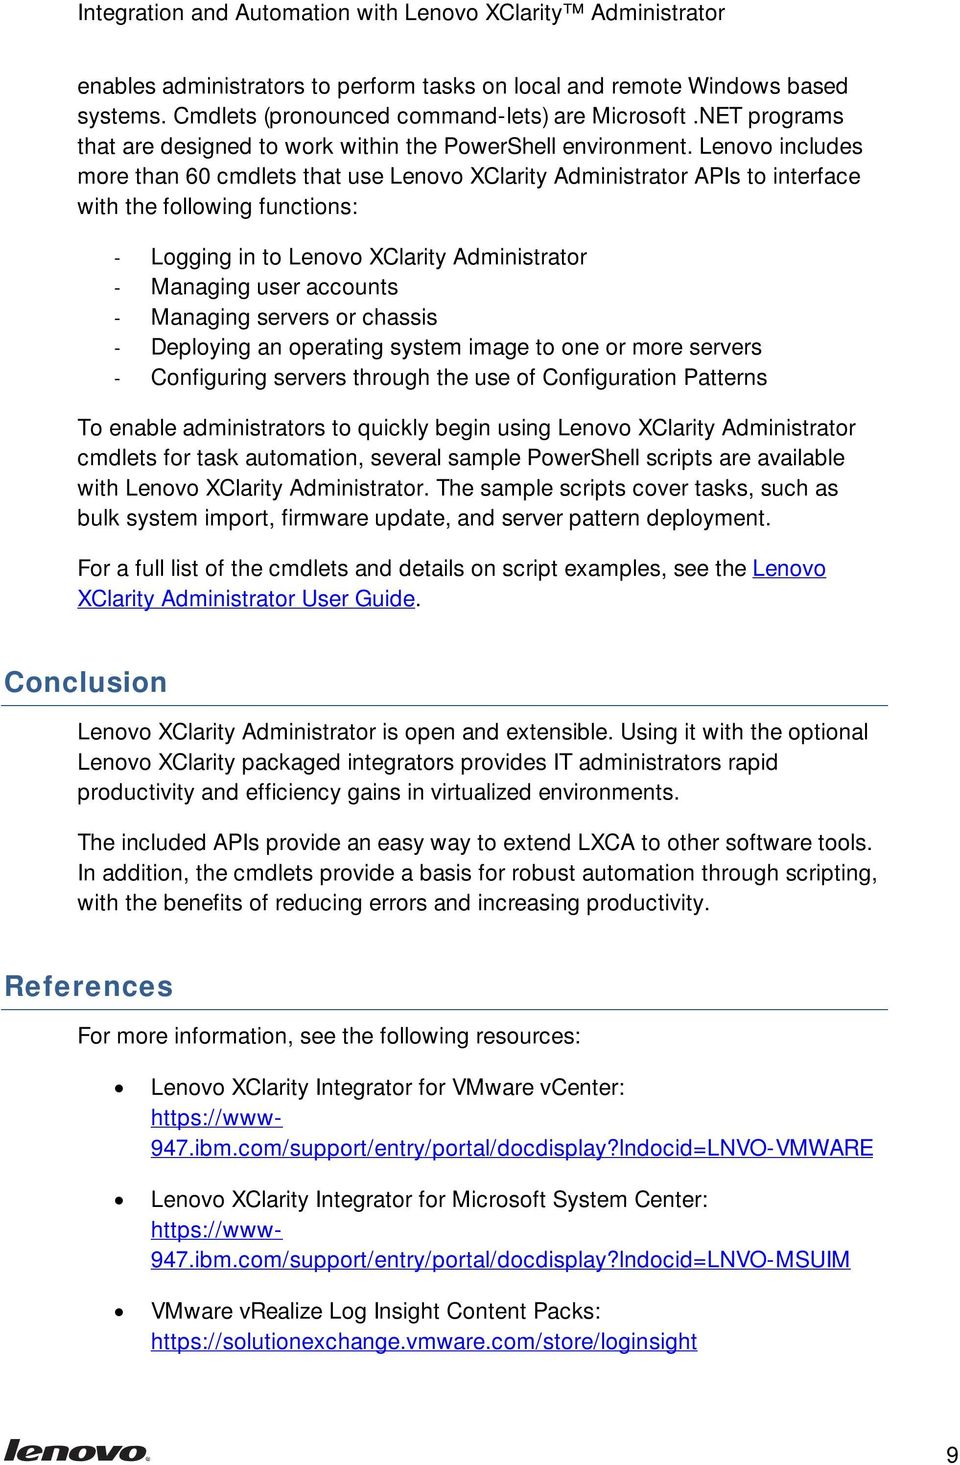 Lenovo includes more than 60 cmdlets that use Lenovo XClarity Administrator APIs to interface with the following functions: - Logging in to Lenovo XClarity Administrator - Managing user accounts -